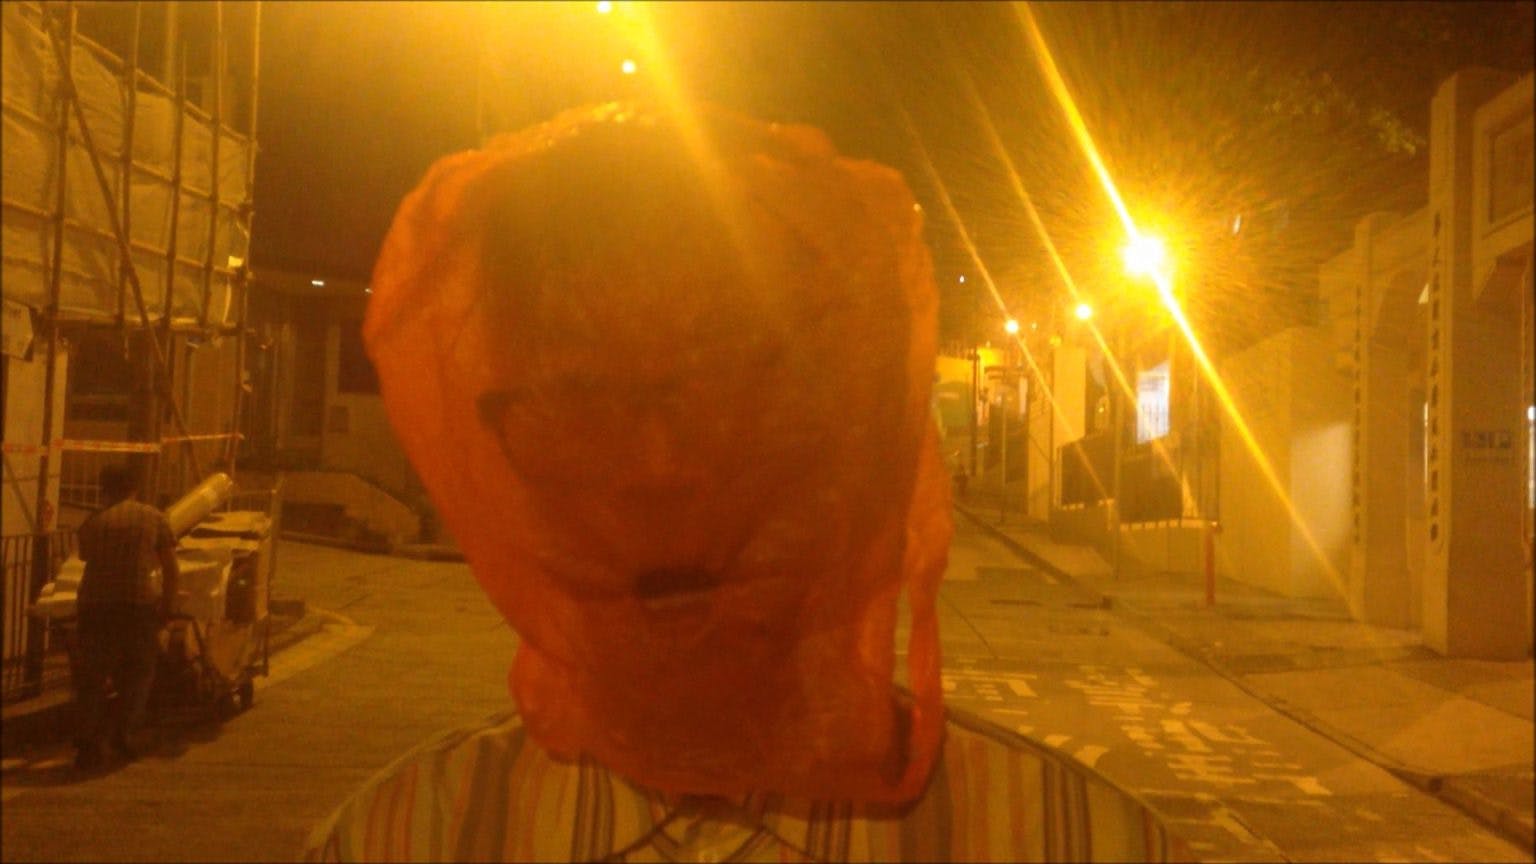 Man with Red Plastic Bag